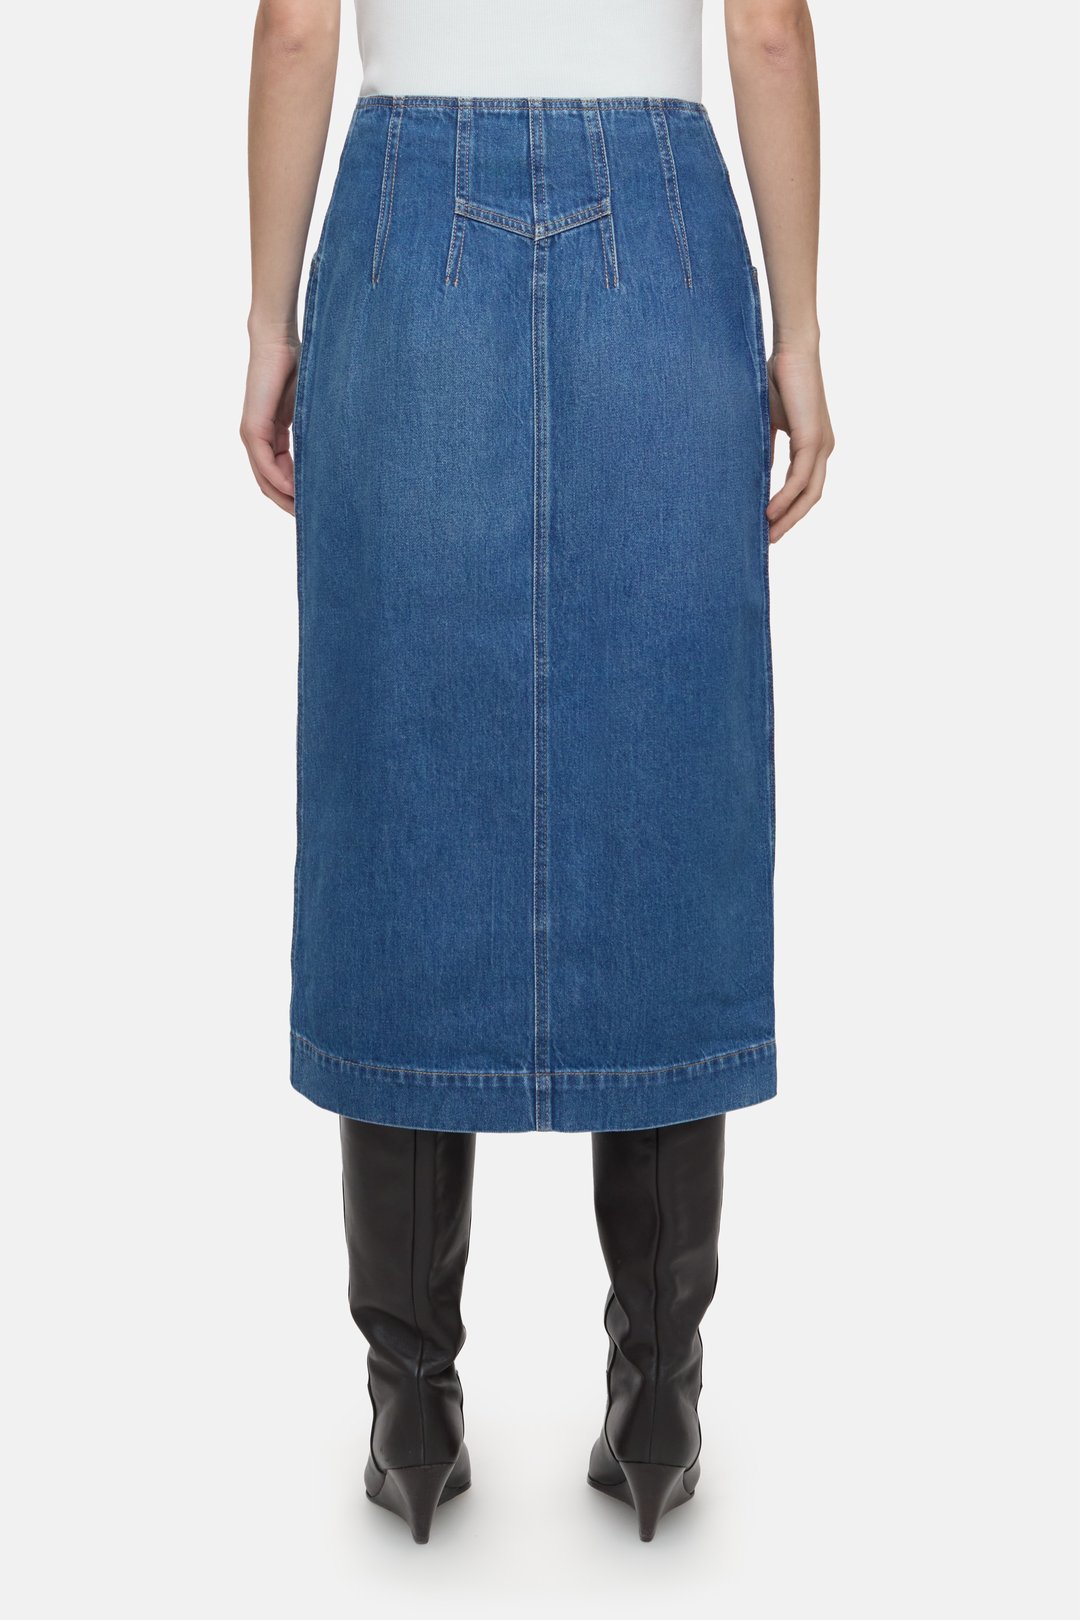 Closed Denim Skirt With Zip In Mid Blue